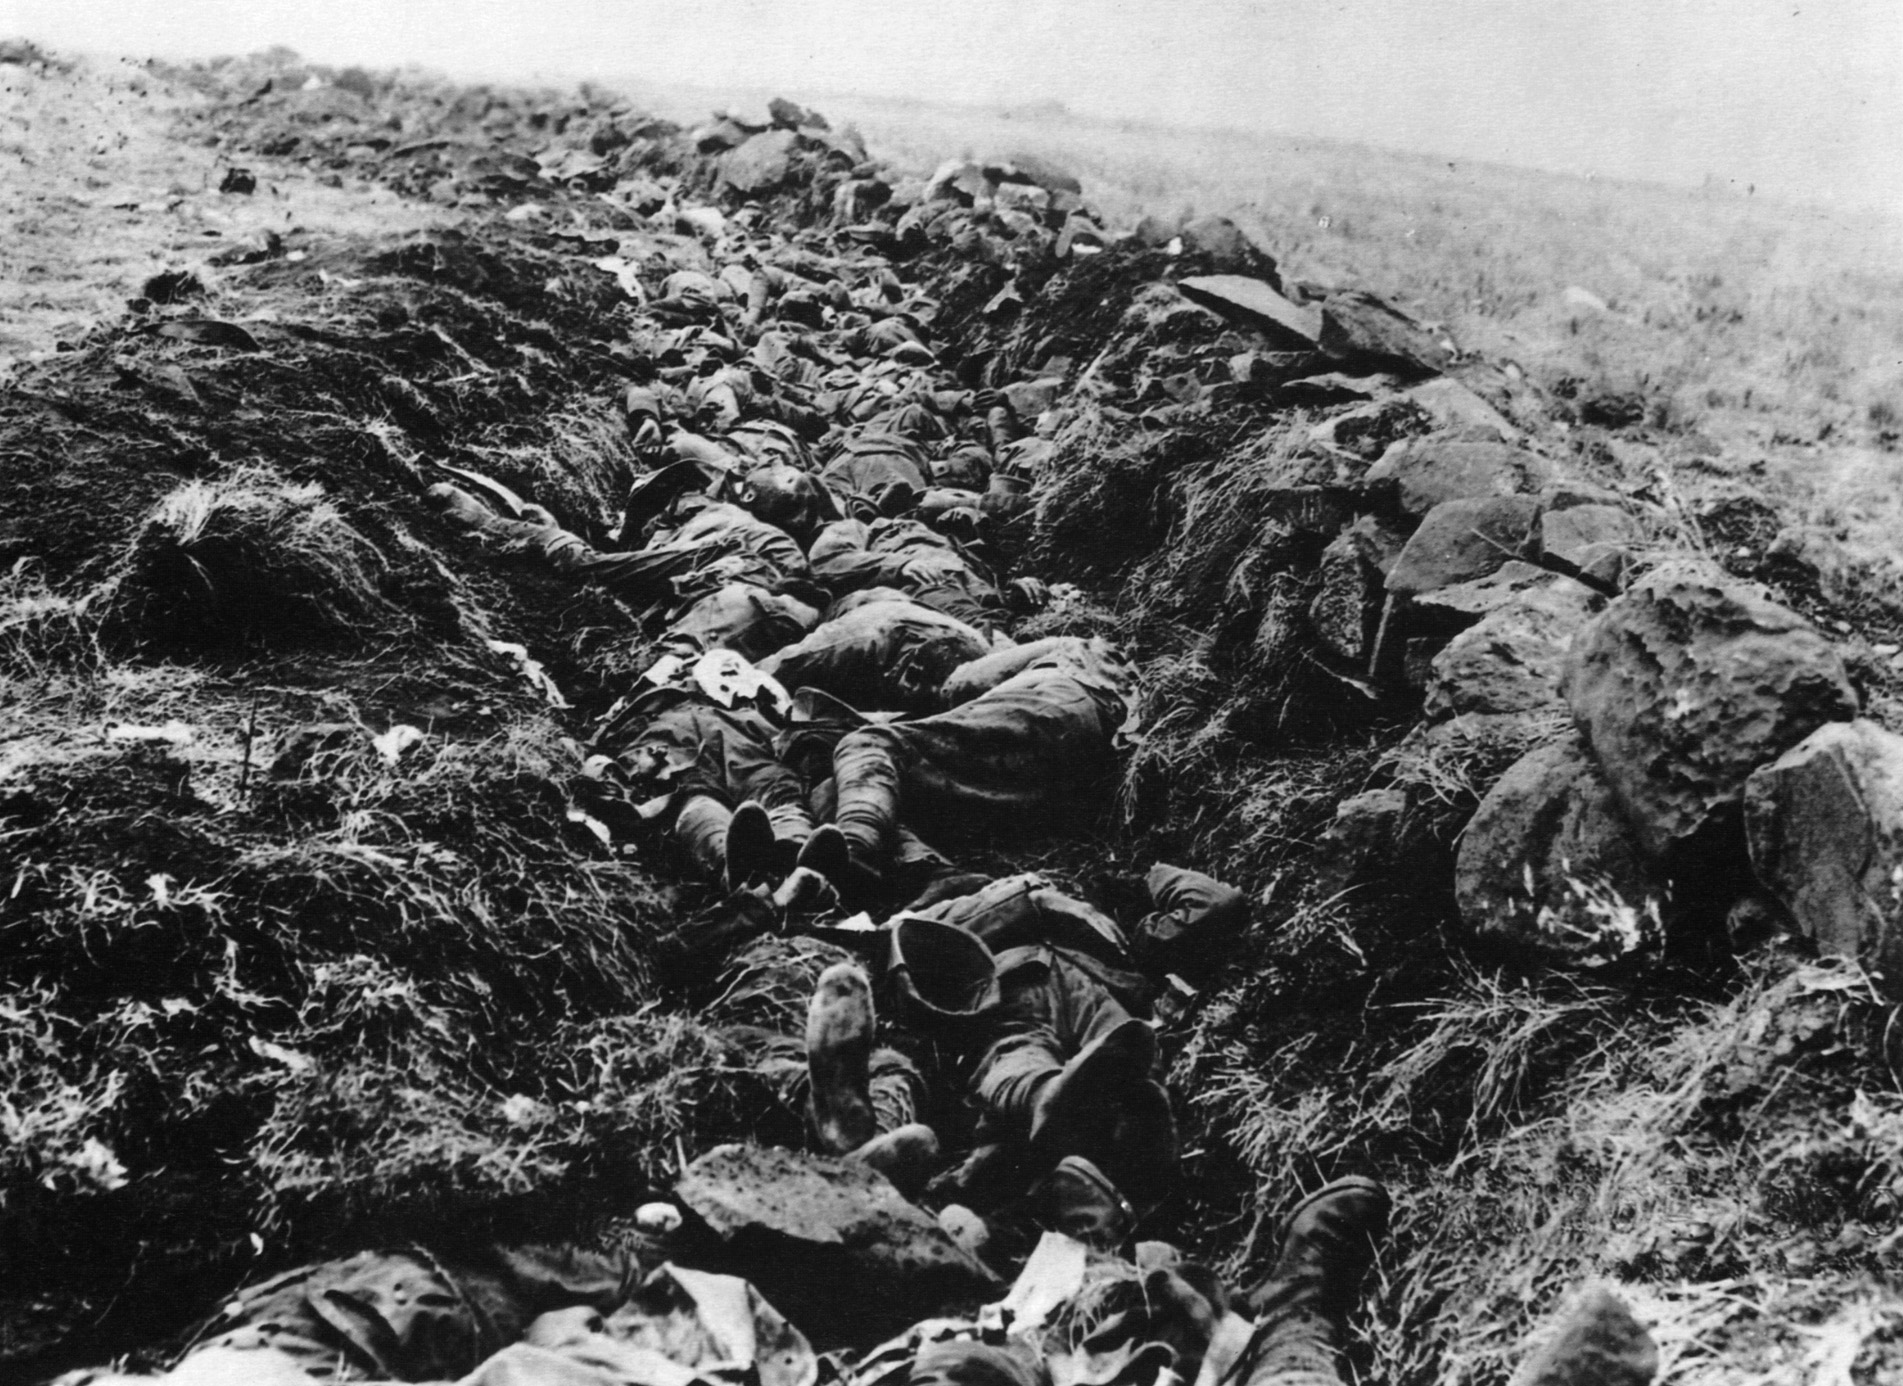 On the morning after the bloody fighting at Spion Kop, a large trench serves as a makeshift grave for some 400 dead soldiers who perished there.